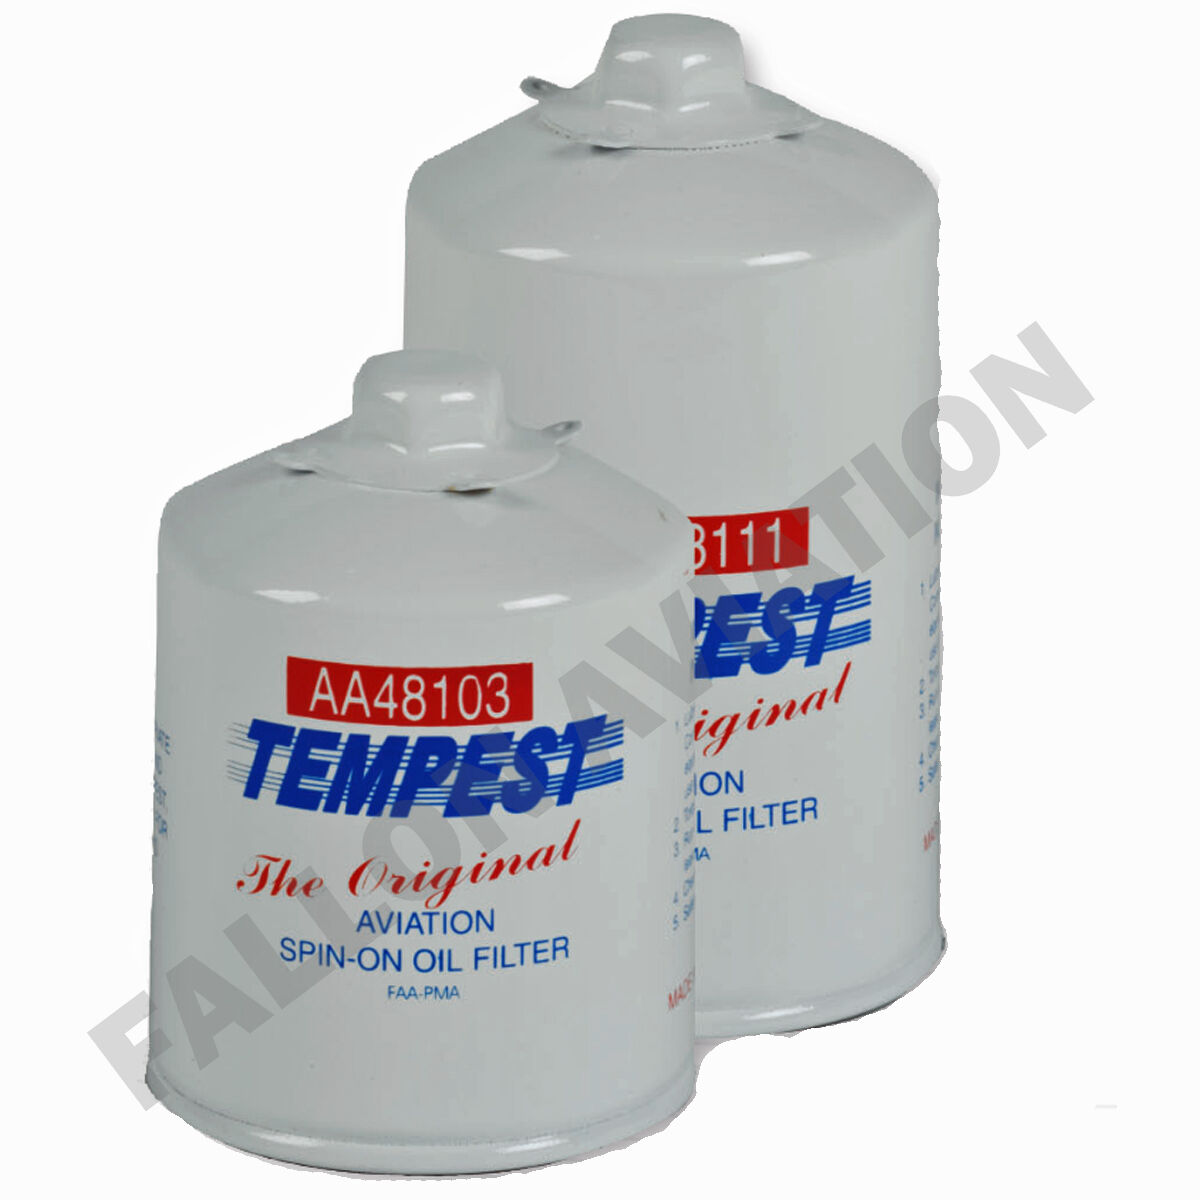 Tempest Aircraft Oil Filter - AA48108-2 - Aviation Spin-On Oil Filter